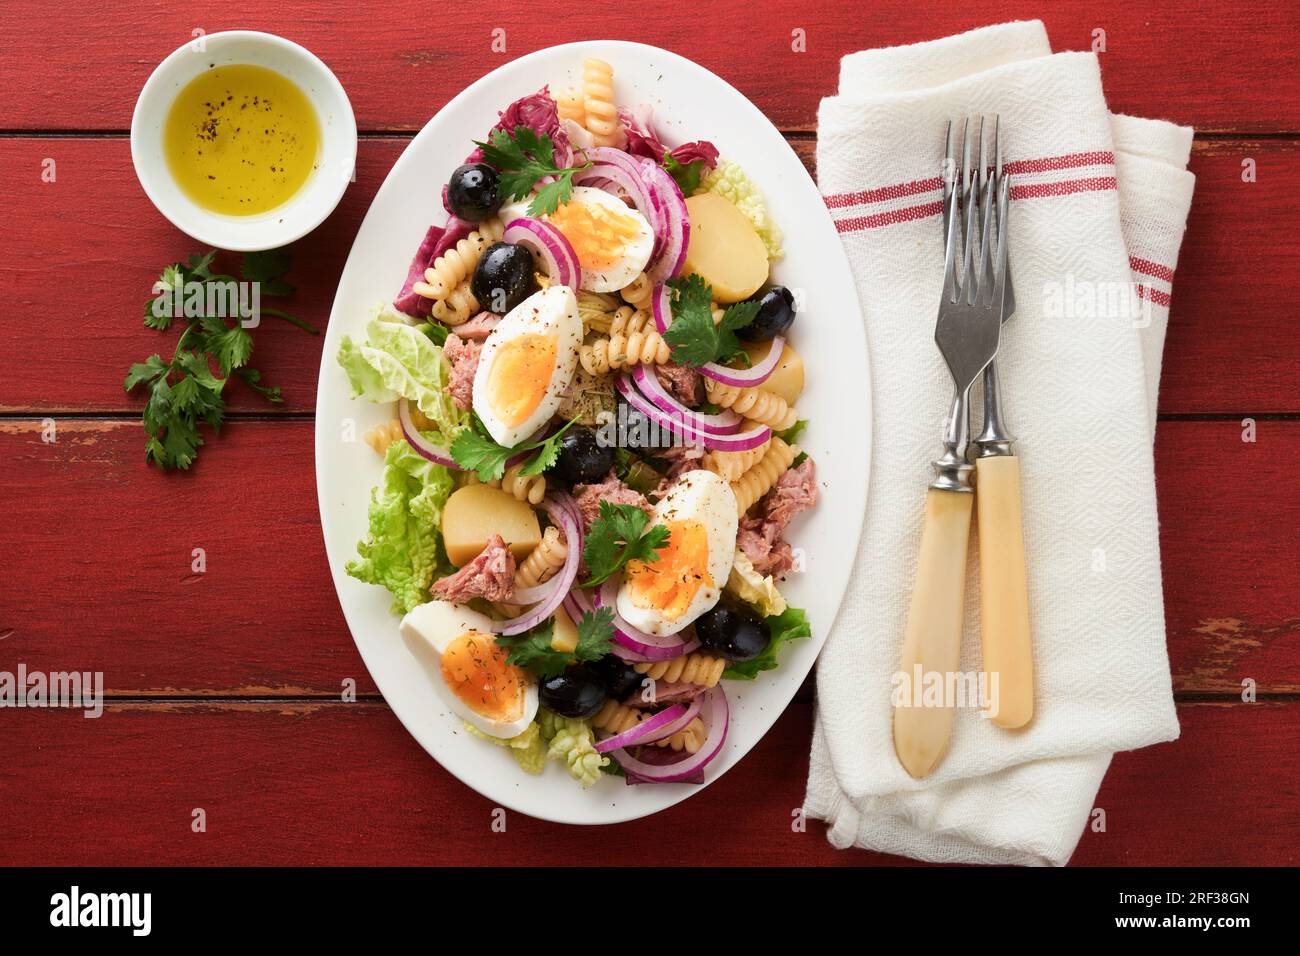 Tuna salad with pasta, eggs, potatoes, olives, red onions and sauce in white plate on old red rustic table background. Nicoise salad. French cuisine. Stock Photo